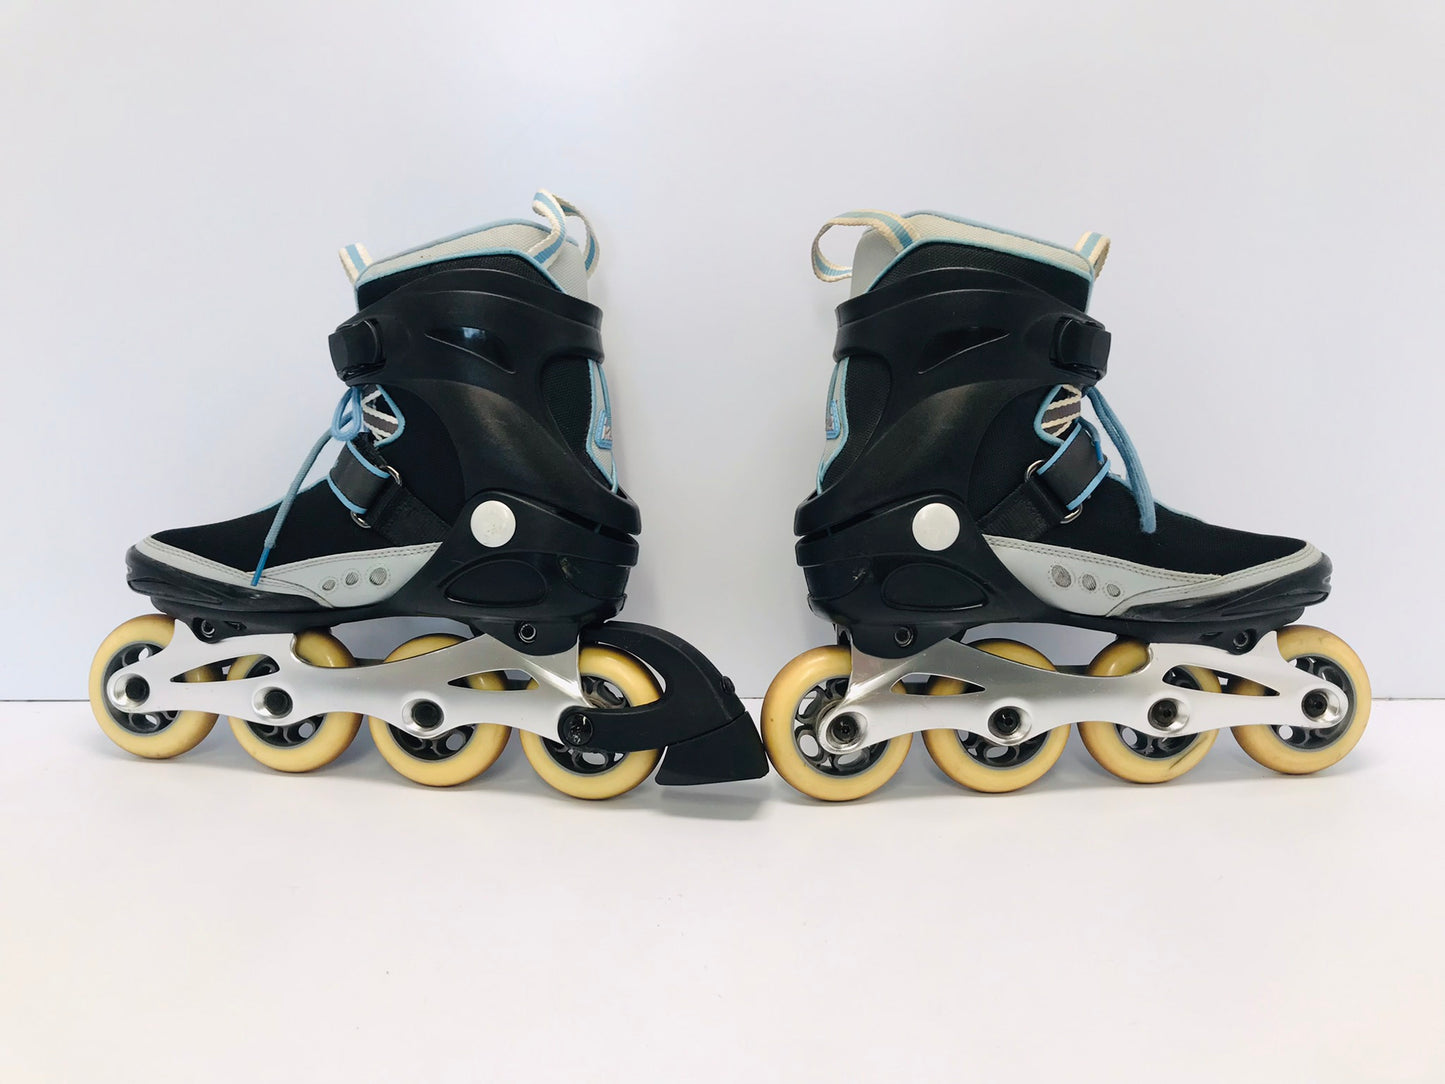 Inline Roller Skates Ladies Size 7.5 K-2 Black Blue Excellent Condition and Quality